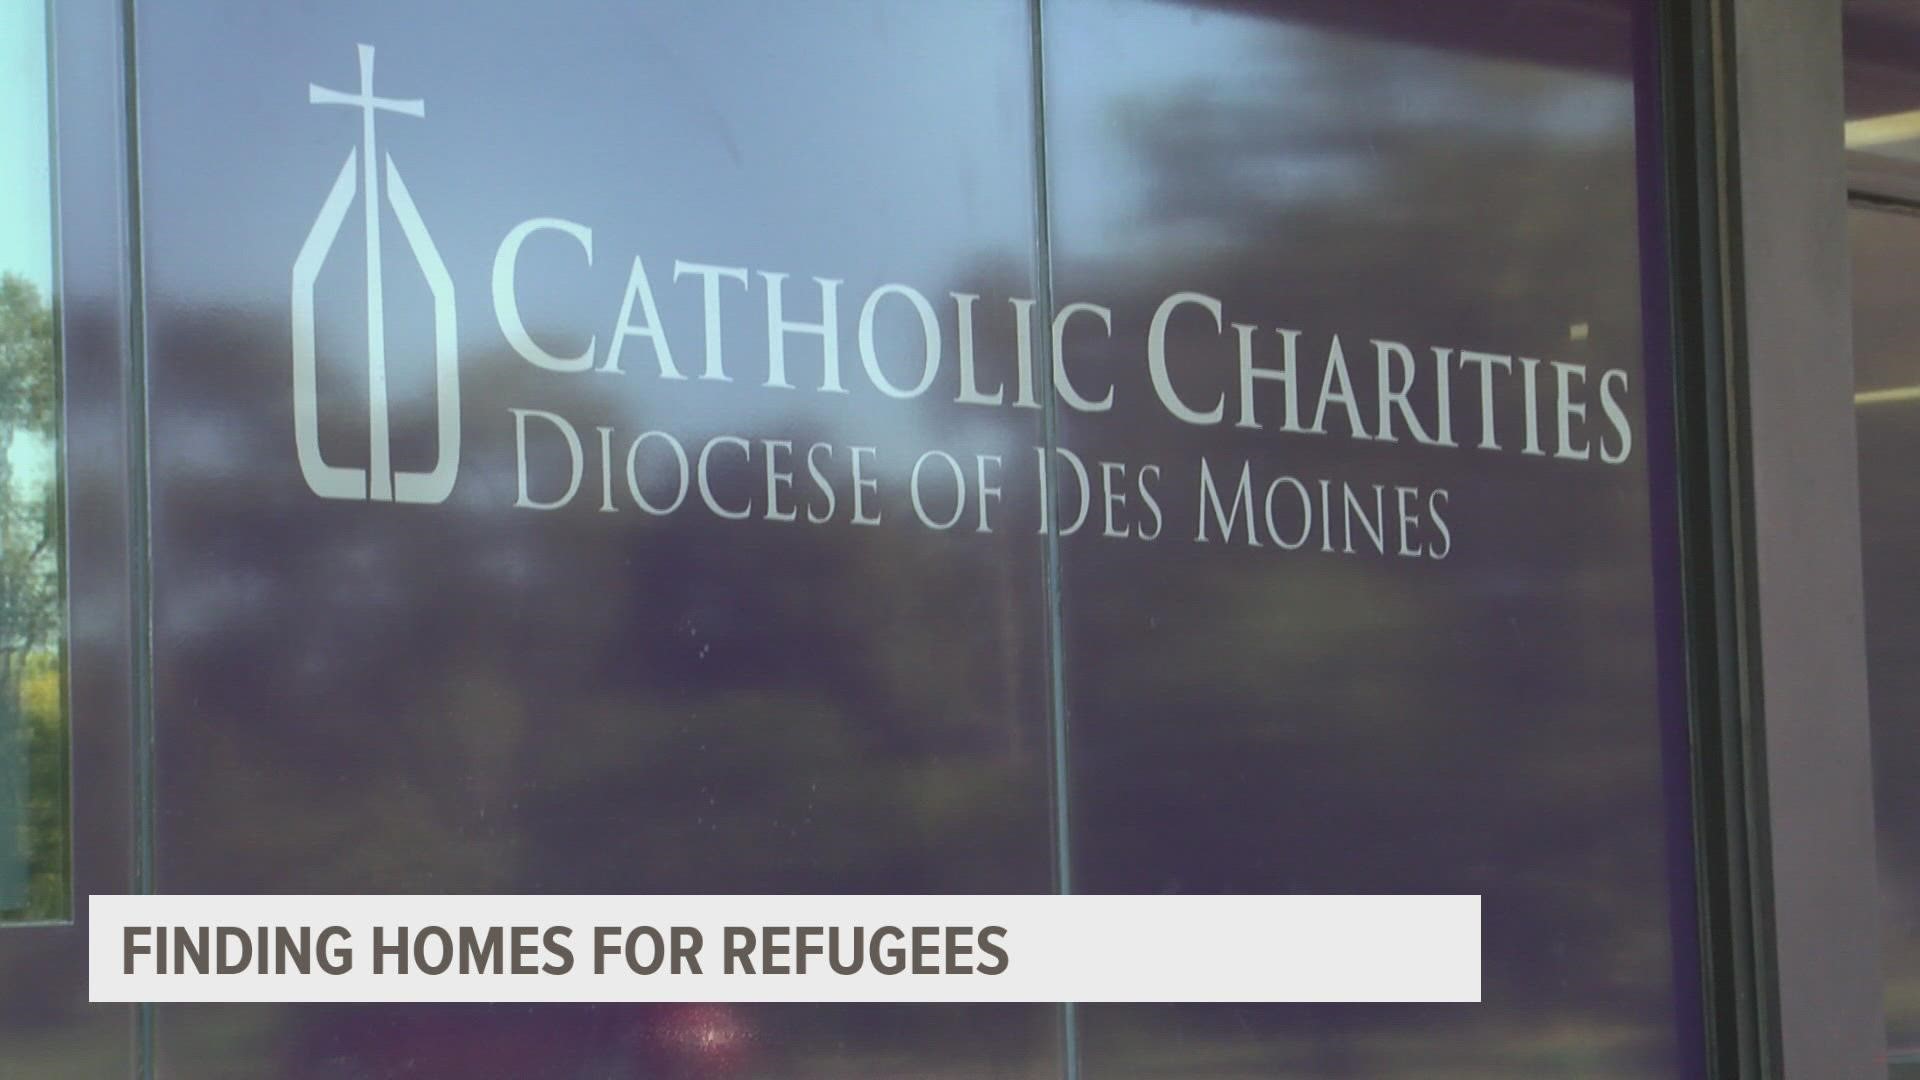 Catholic Charities, Diocese of Des Moines is having to rent extended-stay hotels for refugees coming over, due to the lack of affordable renting options in the area.